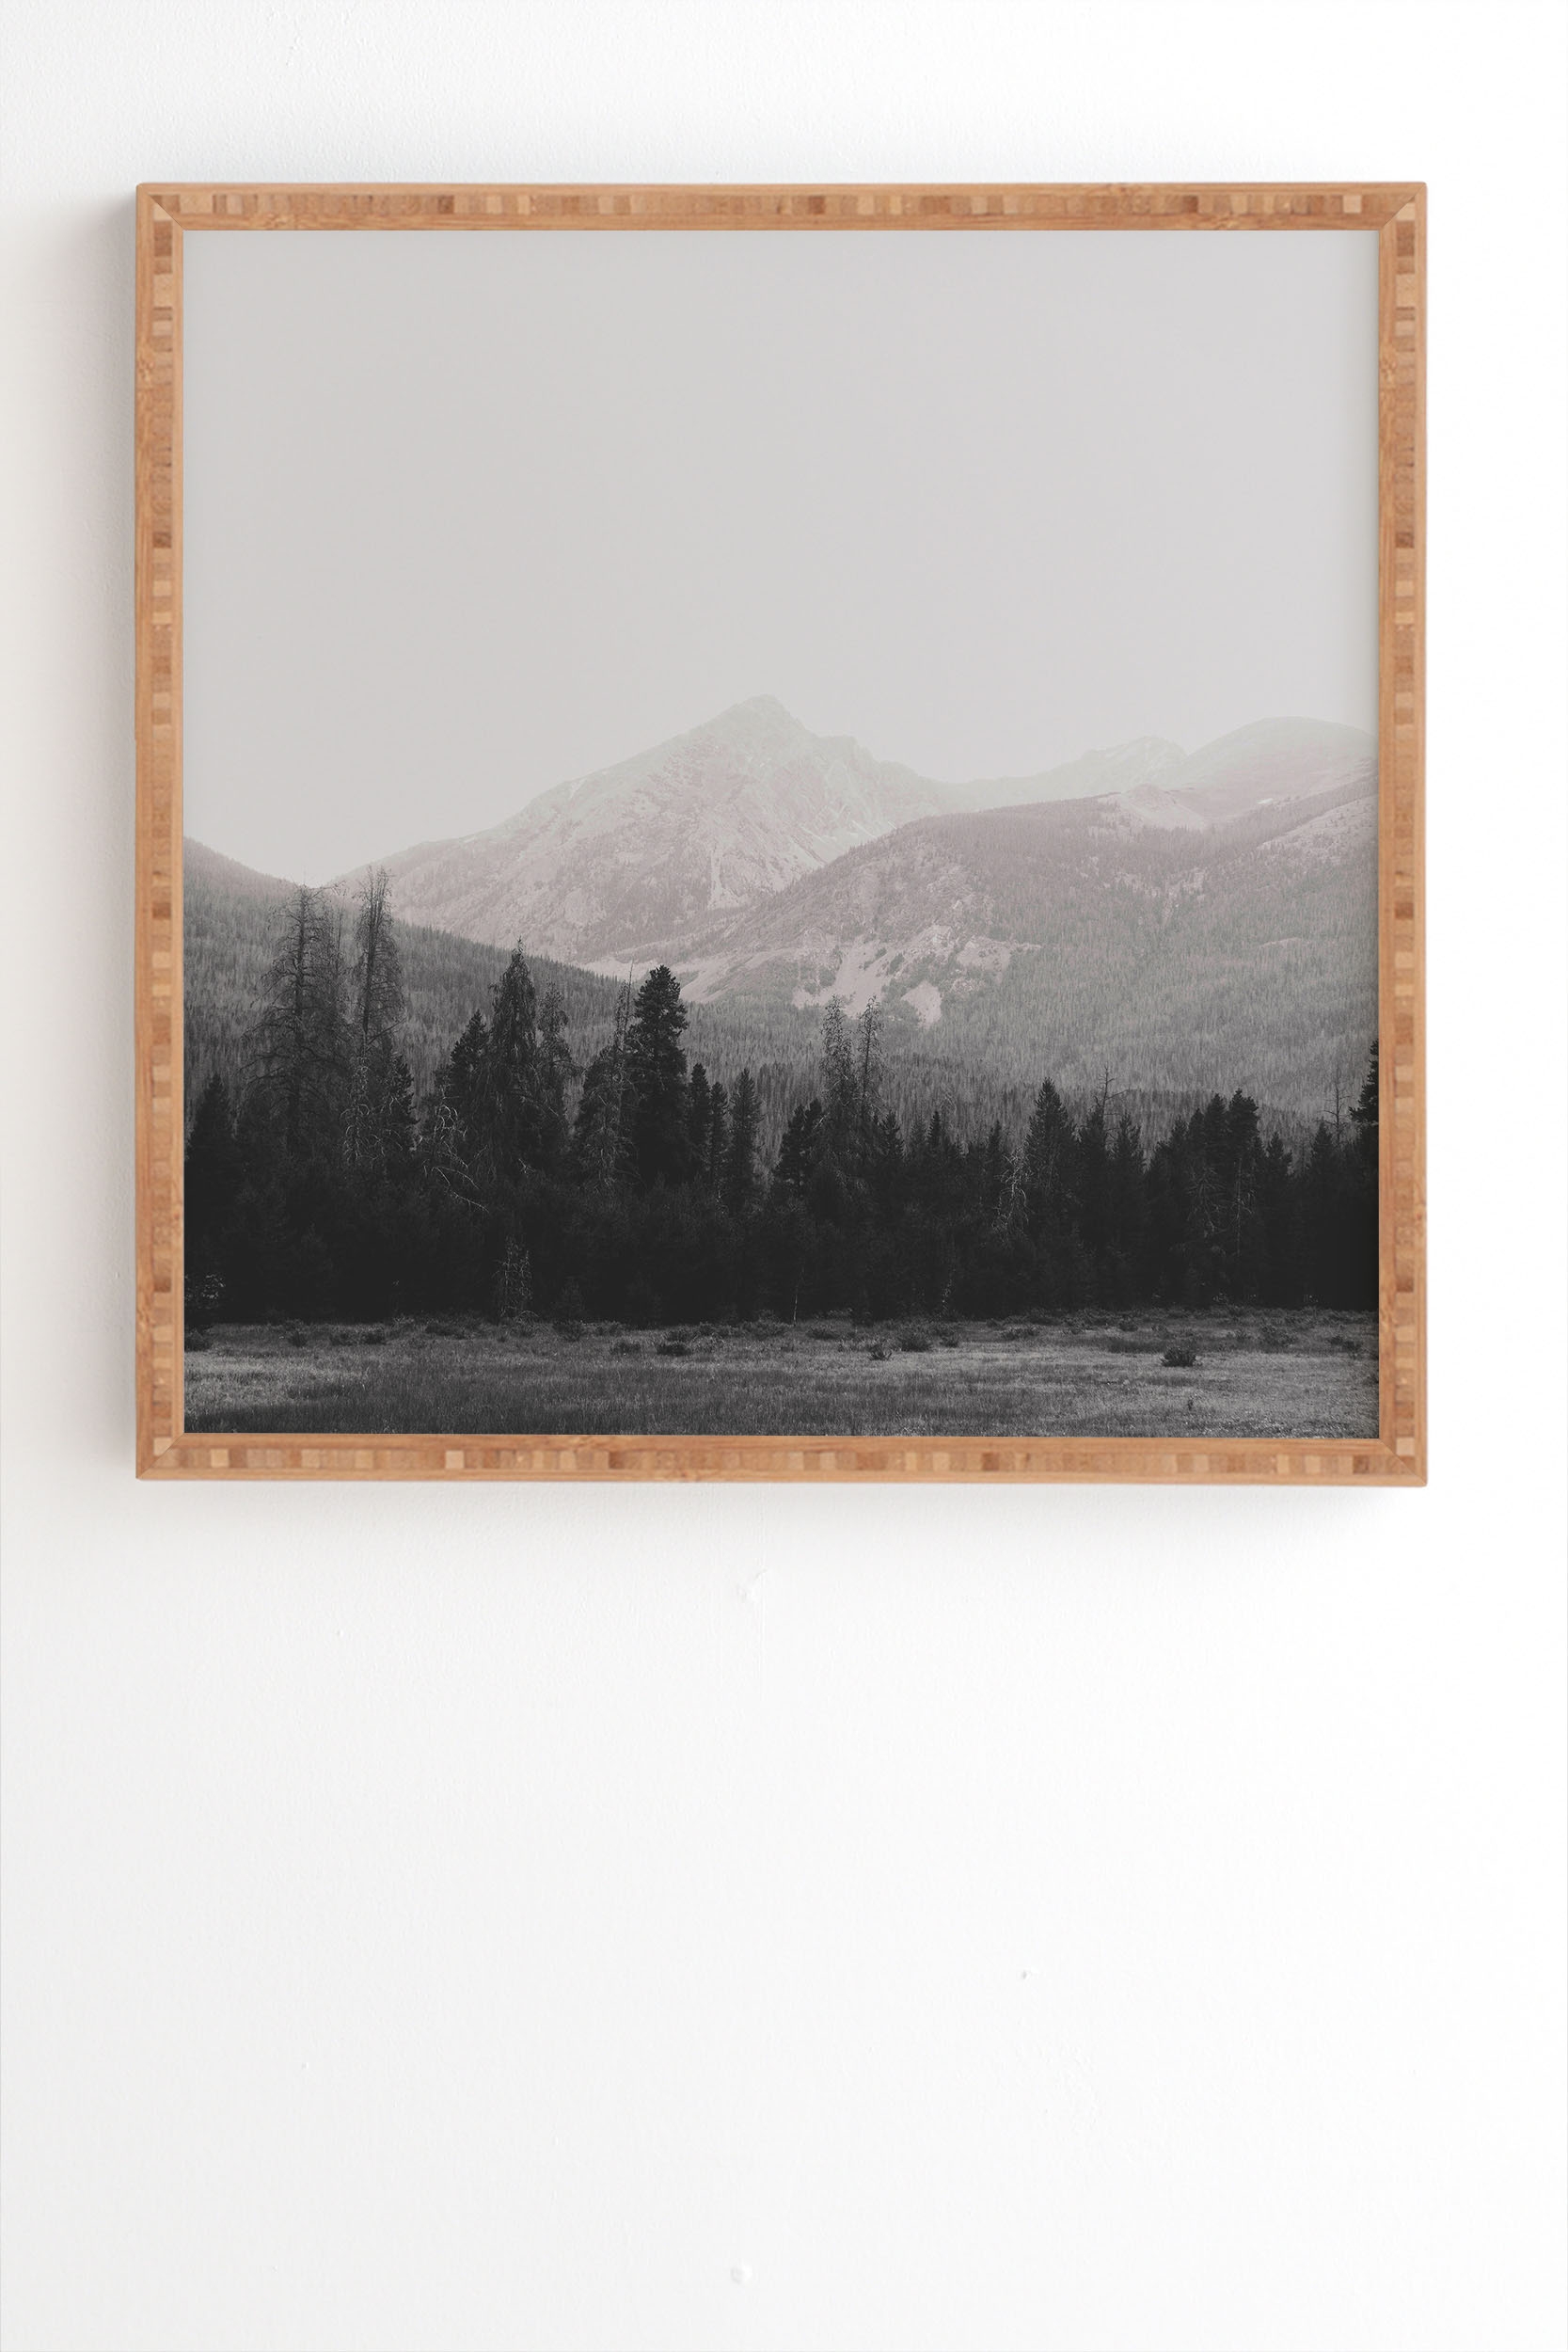 Colorado Rocky Mountains by Catherine McDonald - Framed Wall Art Bamboo 8" x 9.5" - Image 1